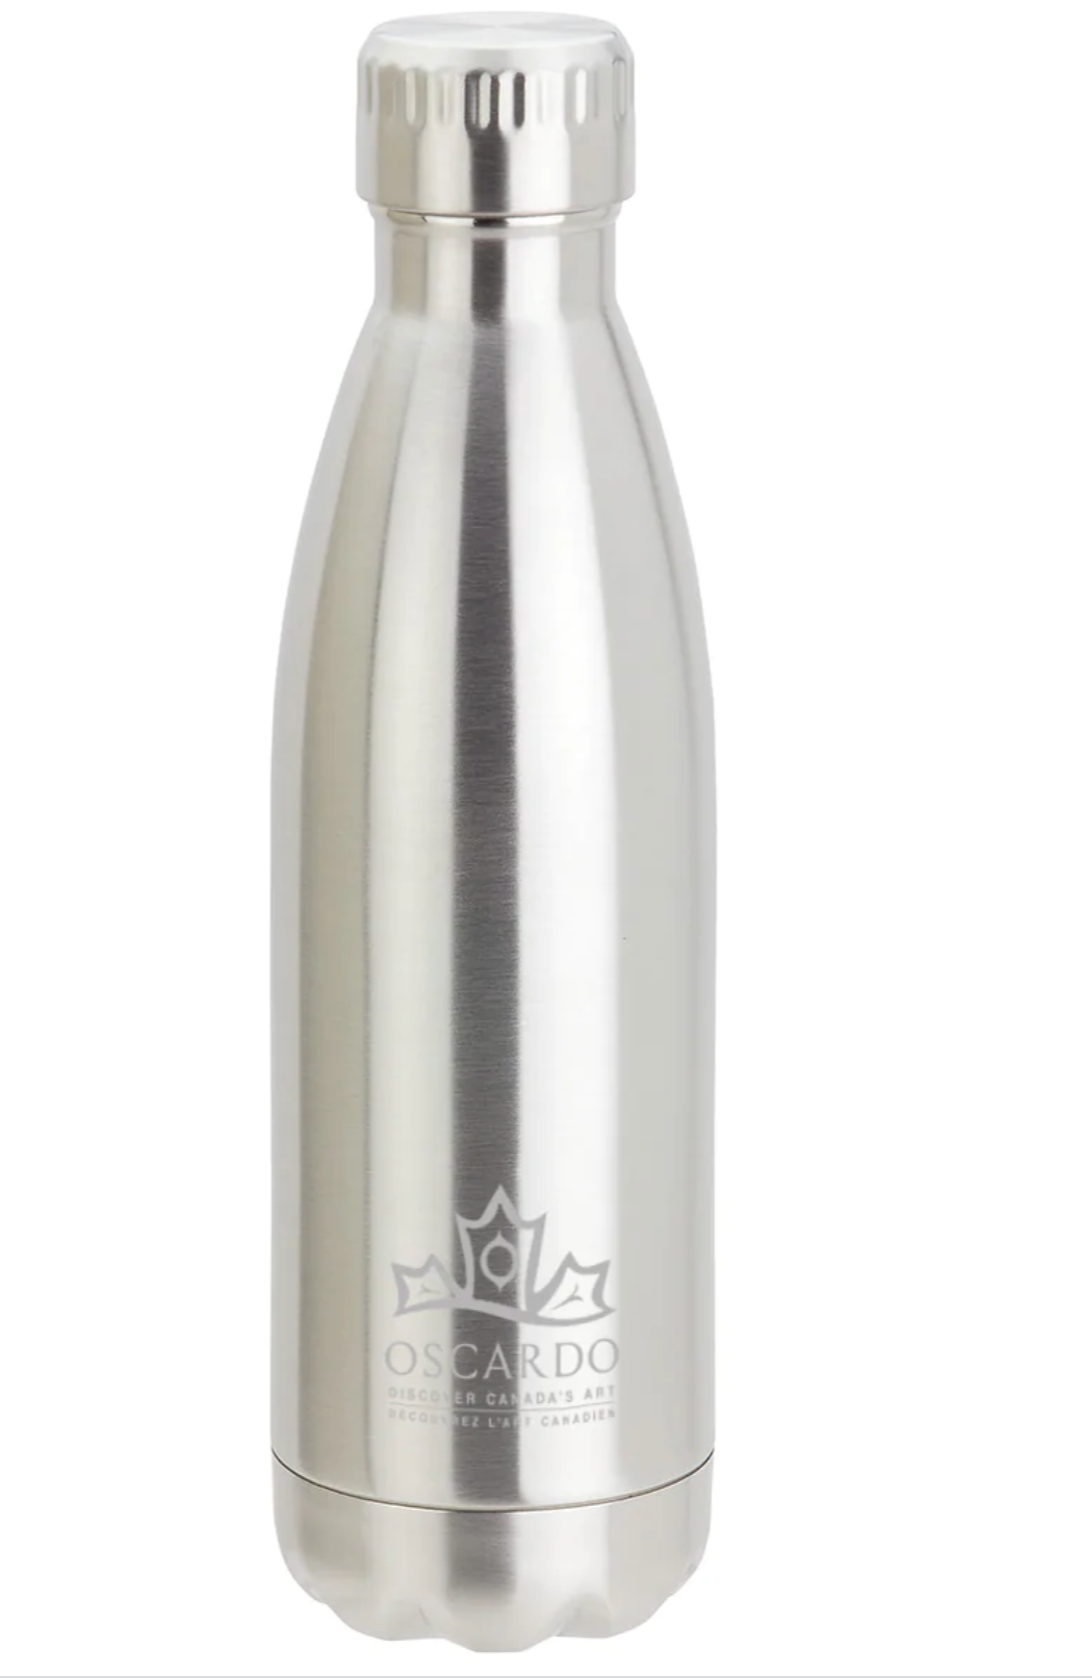 Leah Dorion Breath of Life Water Bottle and Sleeve